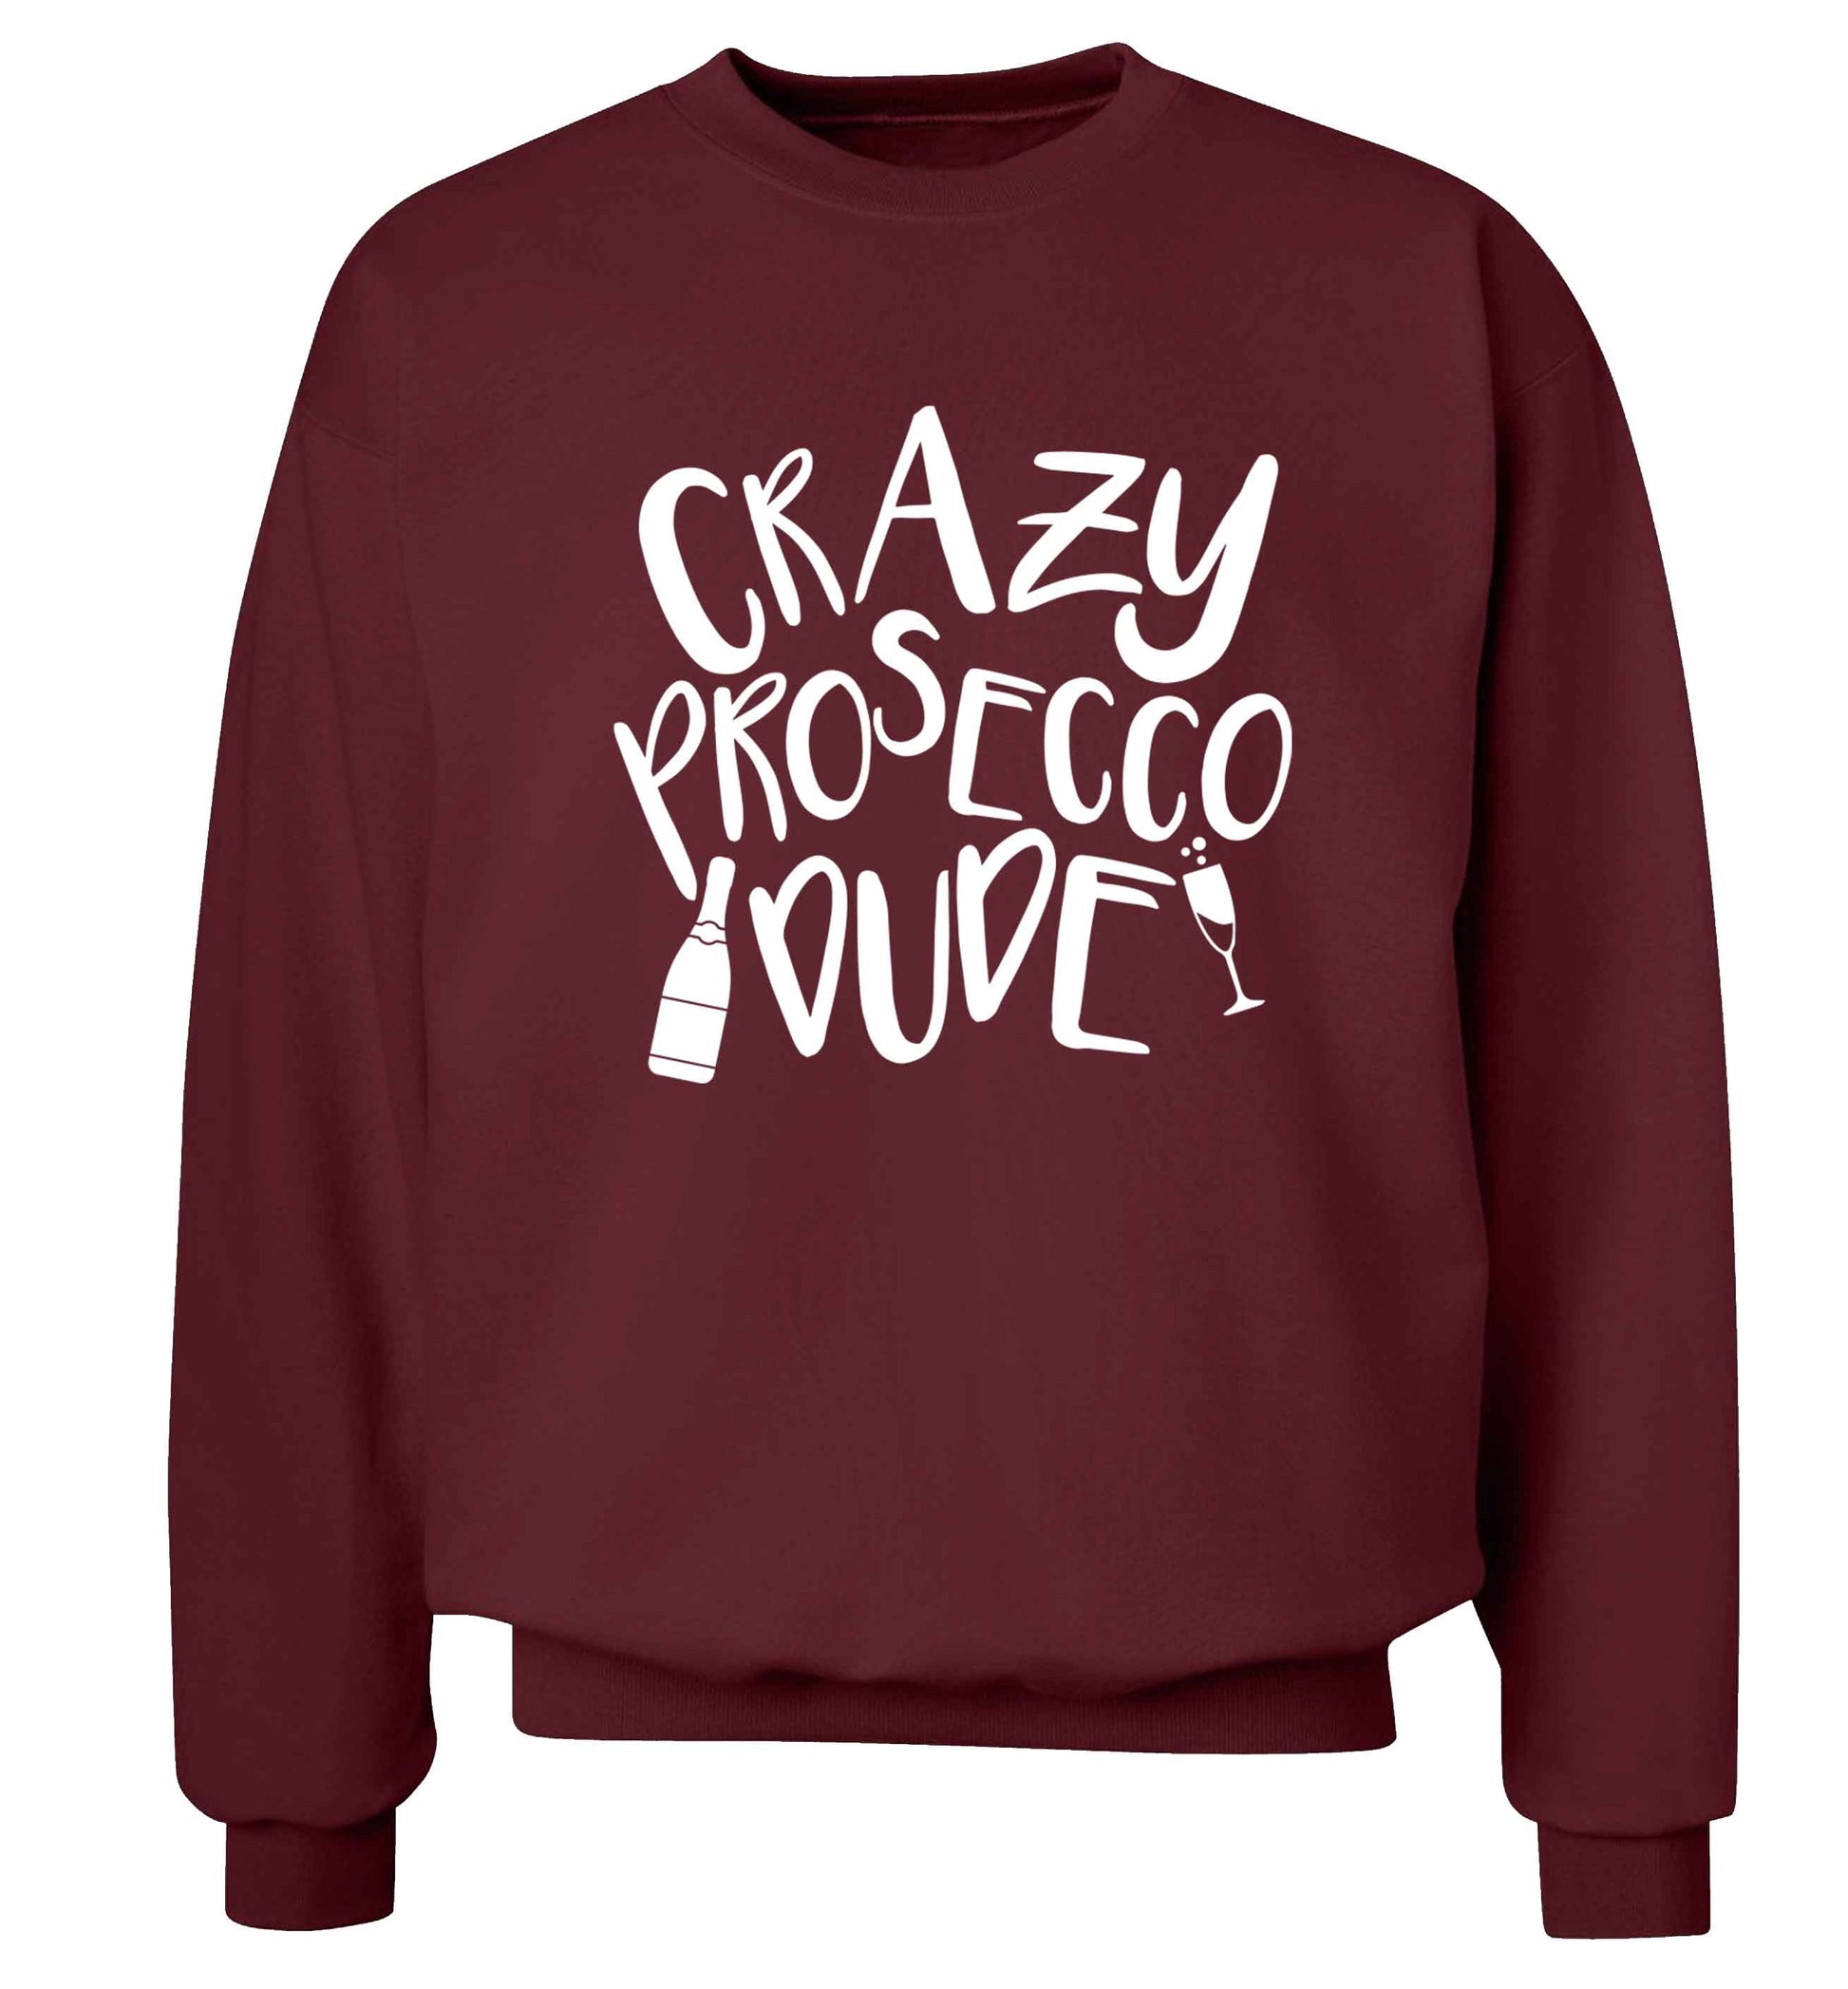 Crazy prosecco dude Adult's unisex maroon Sweater 2XL